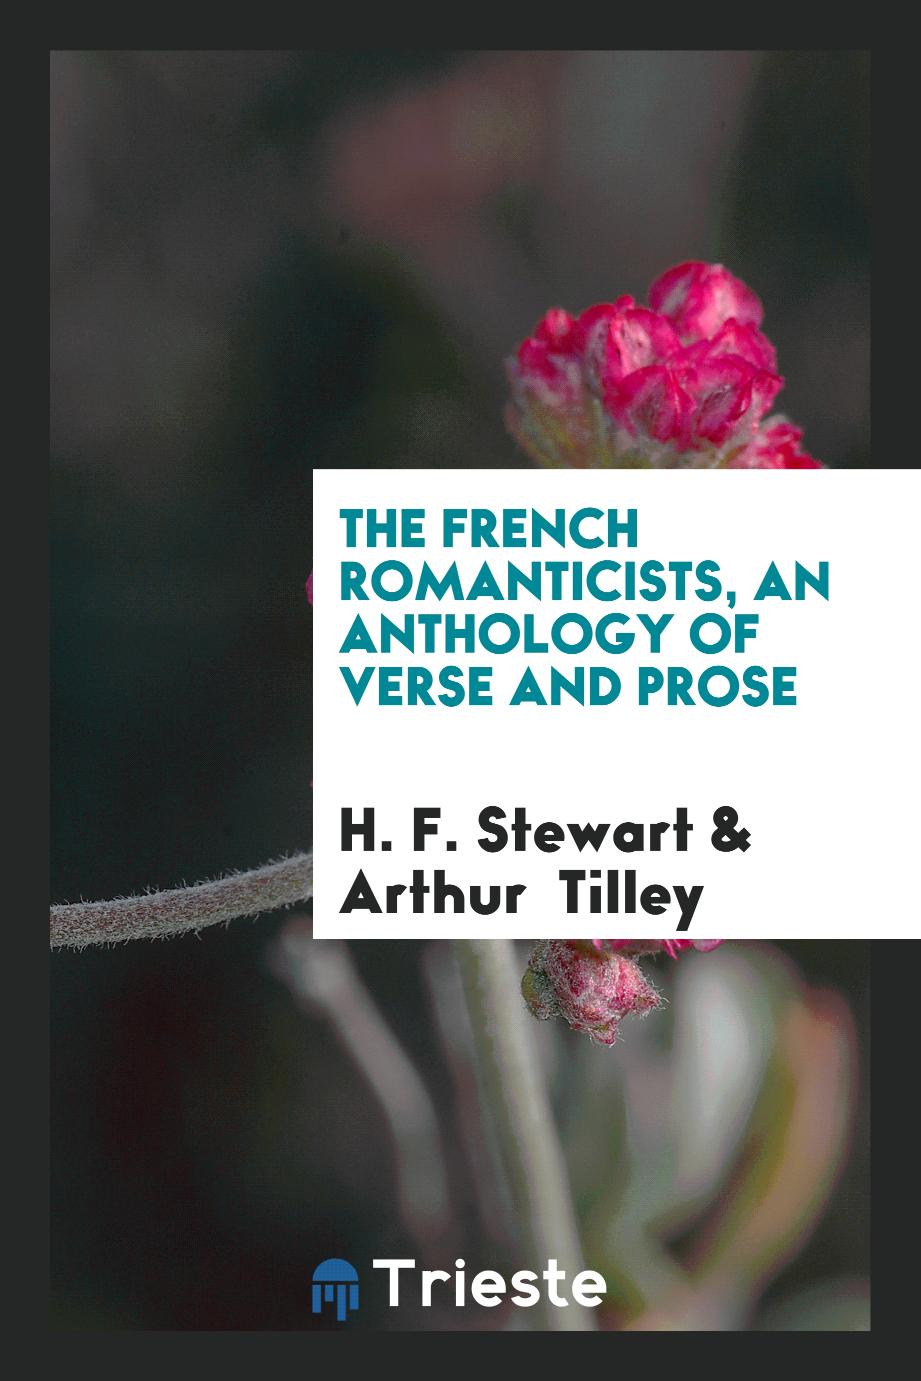 The French romanticists, an anthology of verse and prose